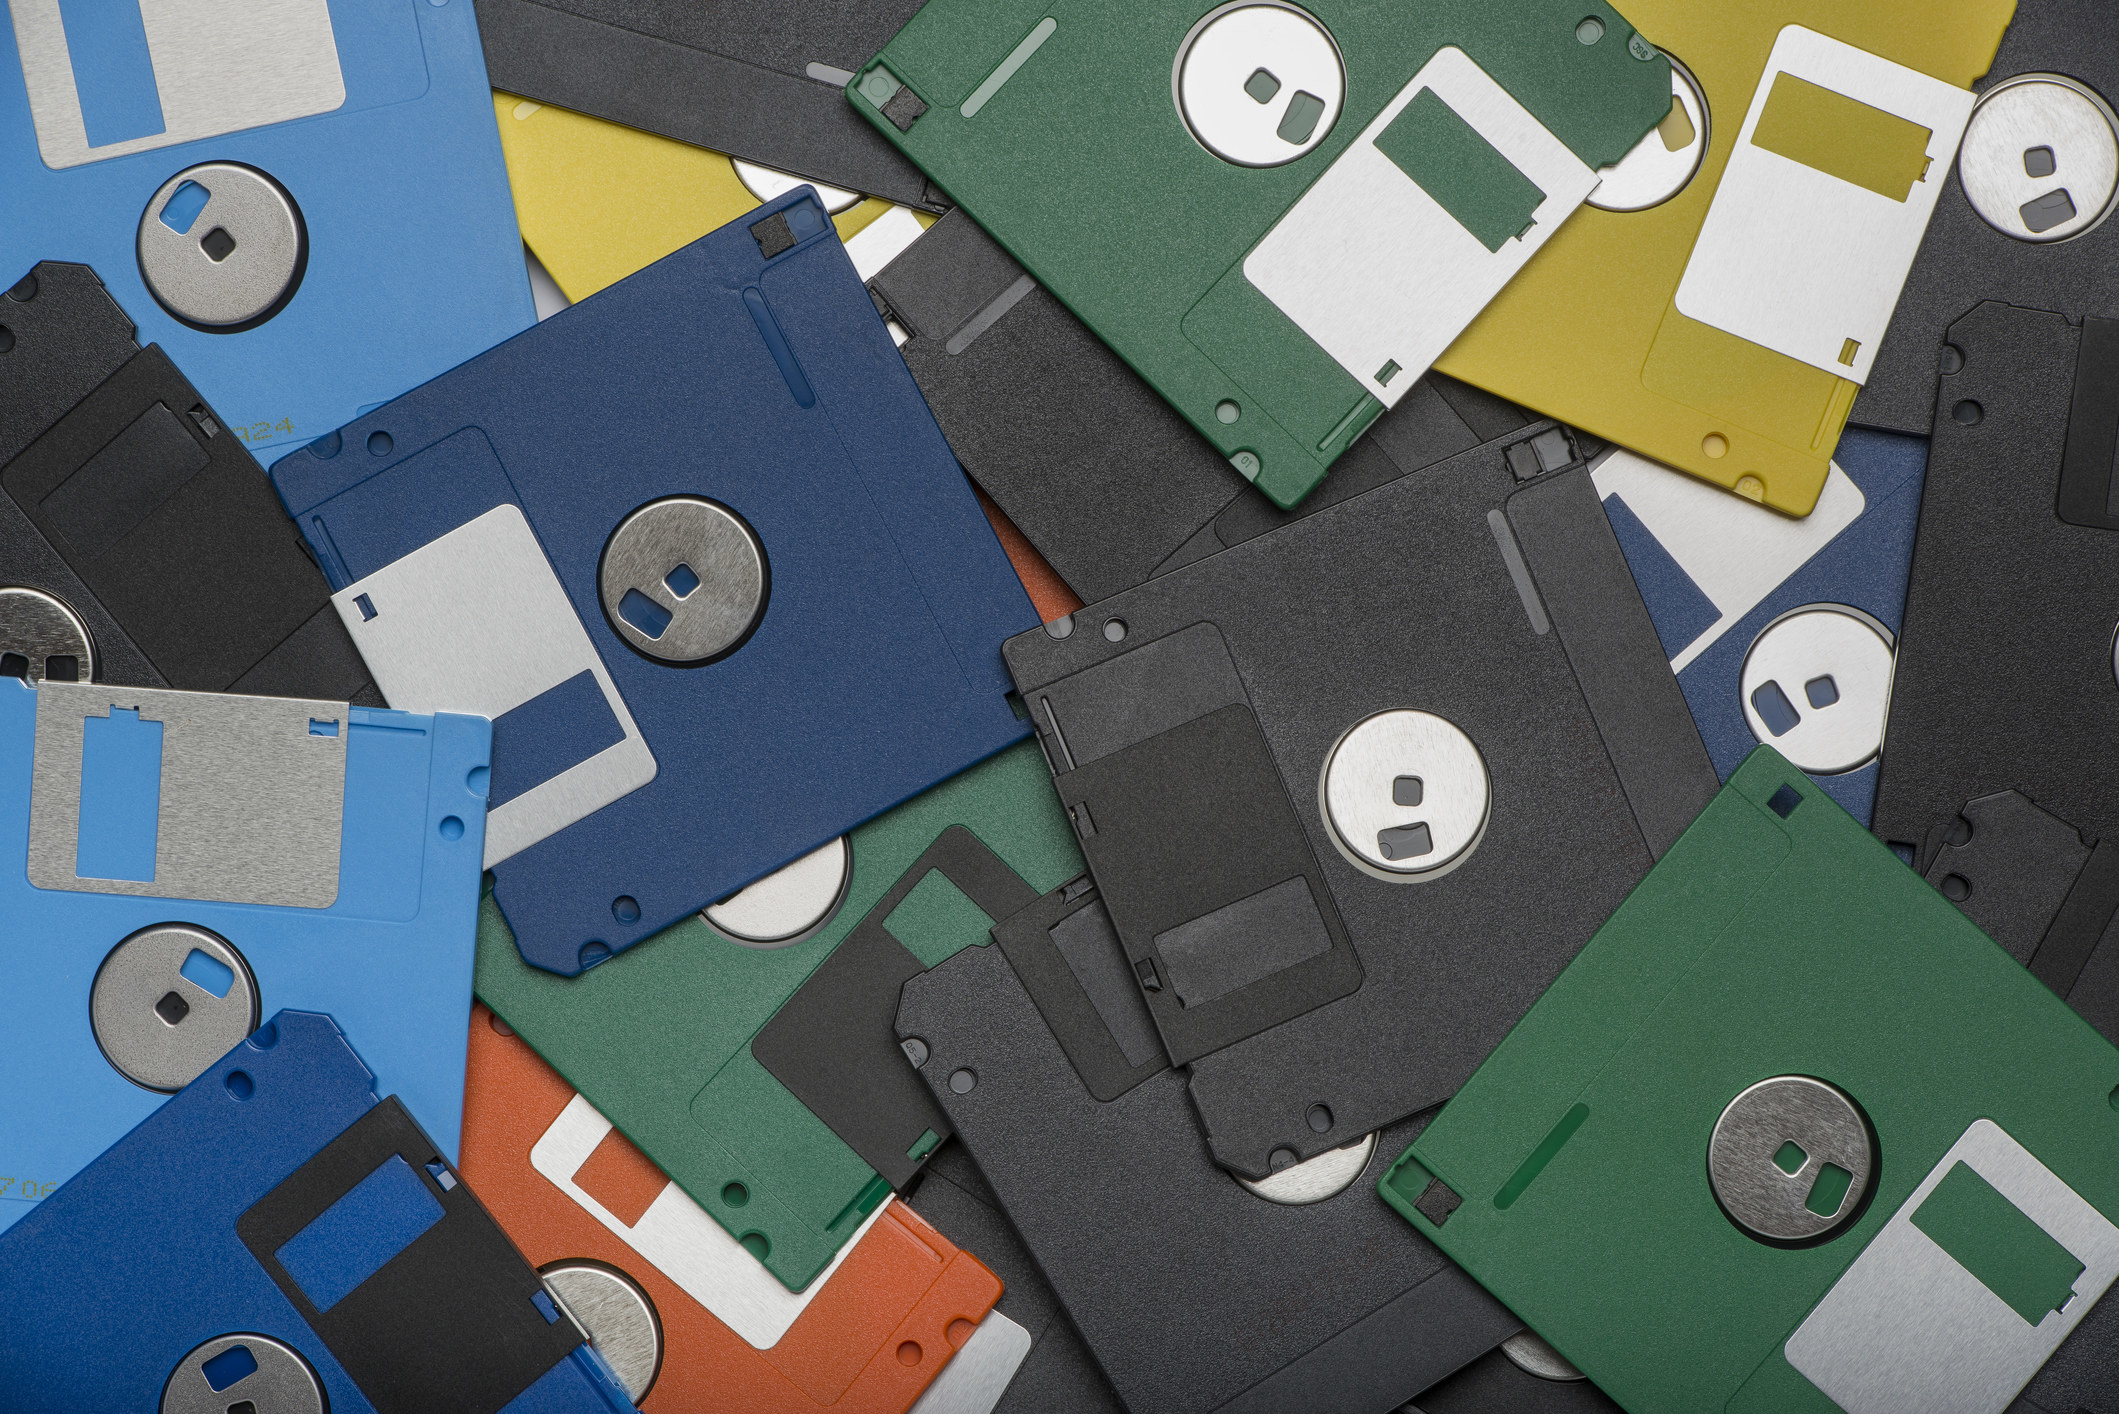 A pile of floppy disks